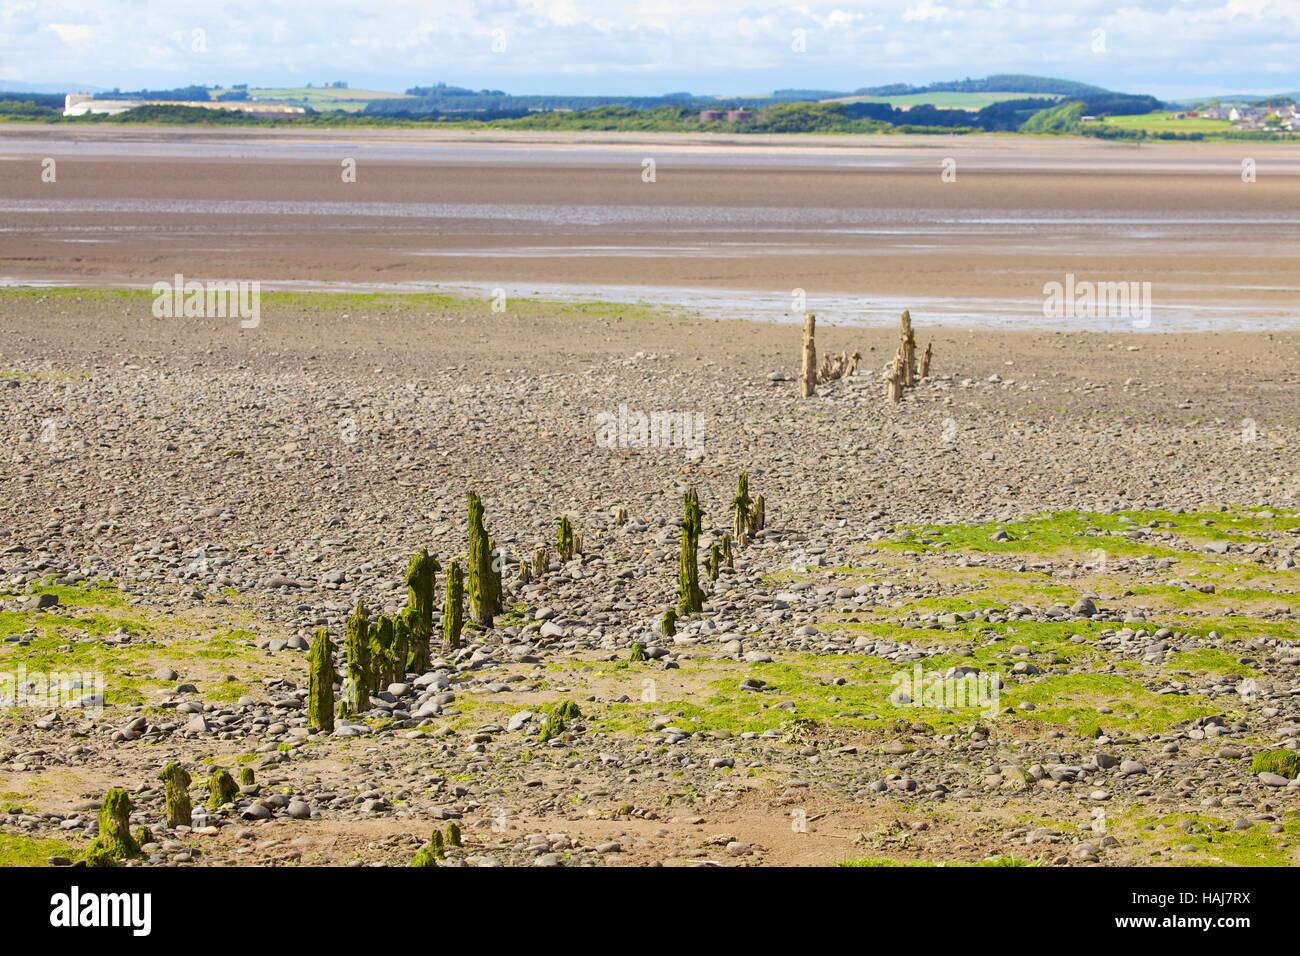 Ruined pier. Scargravel Point, North Plain, Bowness on Solway, Solway Coast, Cumbria, England, United Kingdom, Europe. Stock Photo